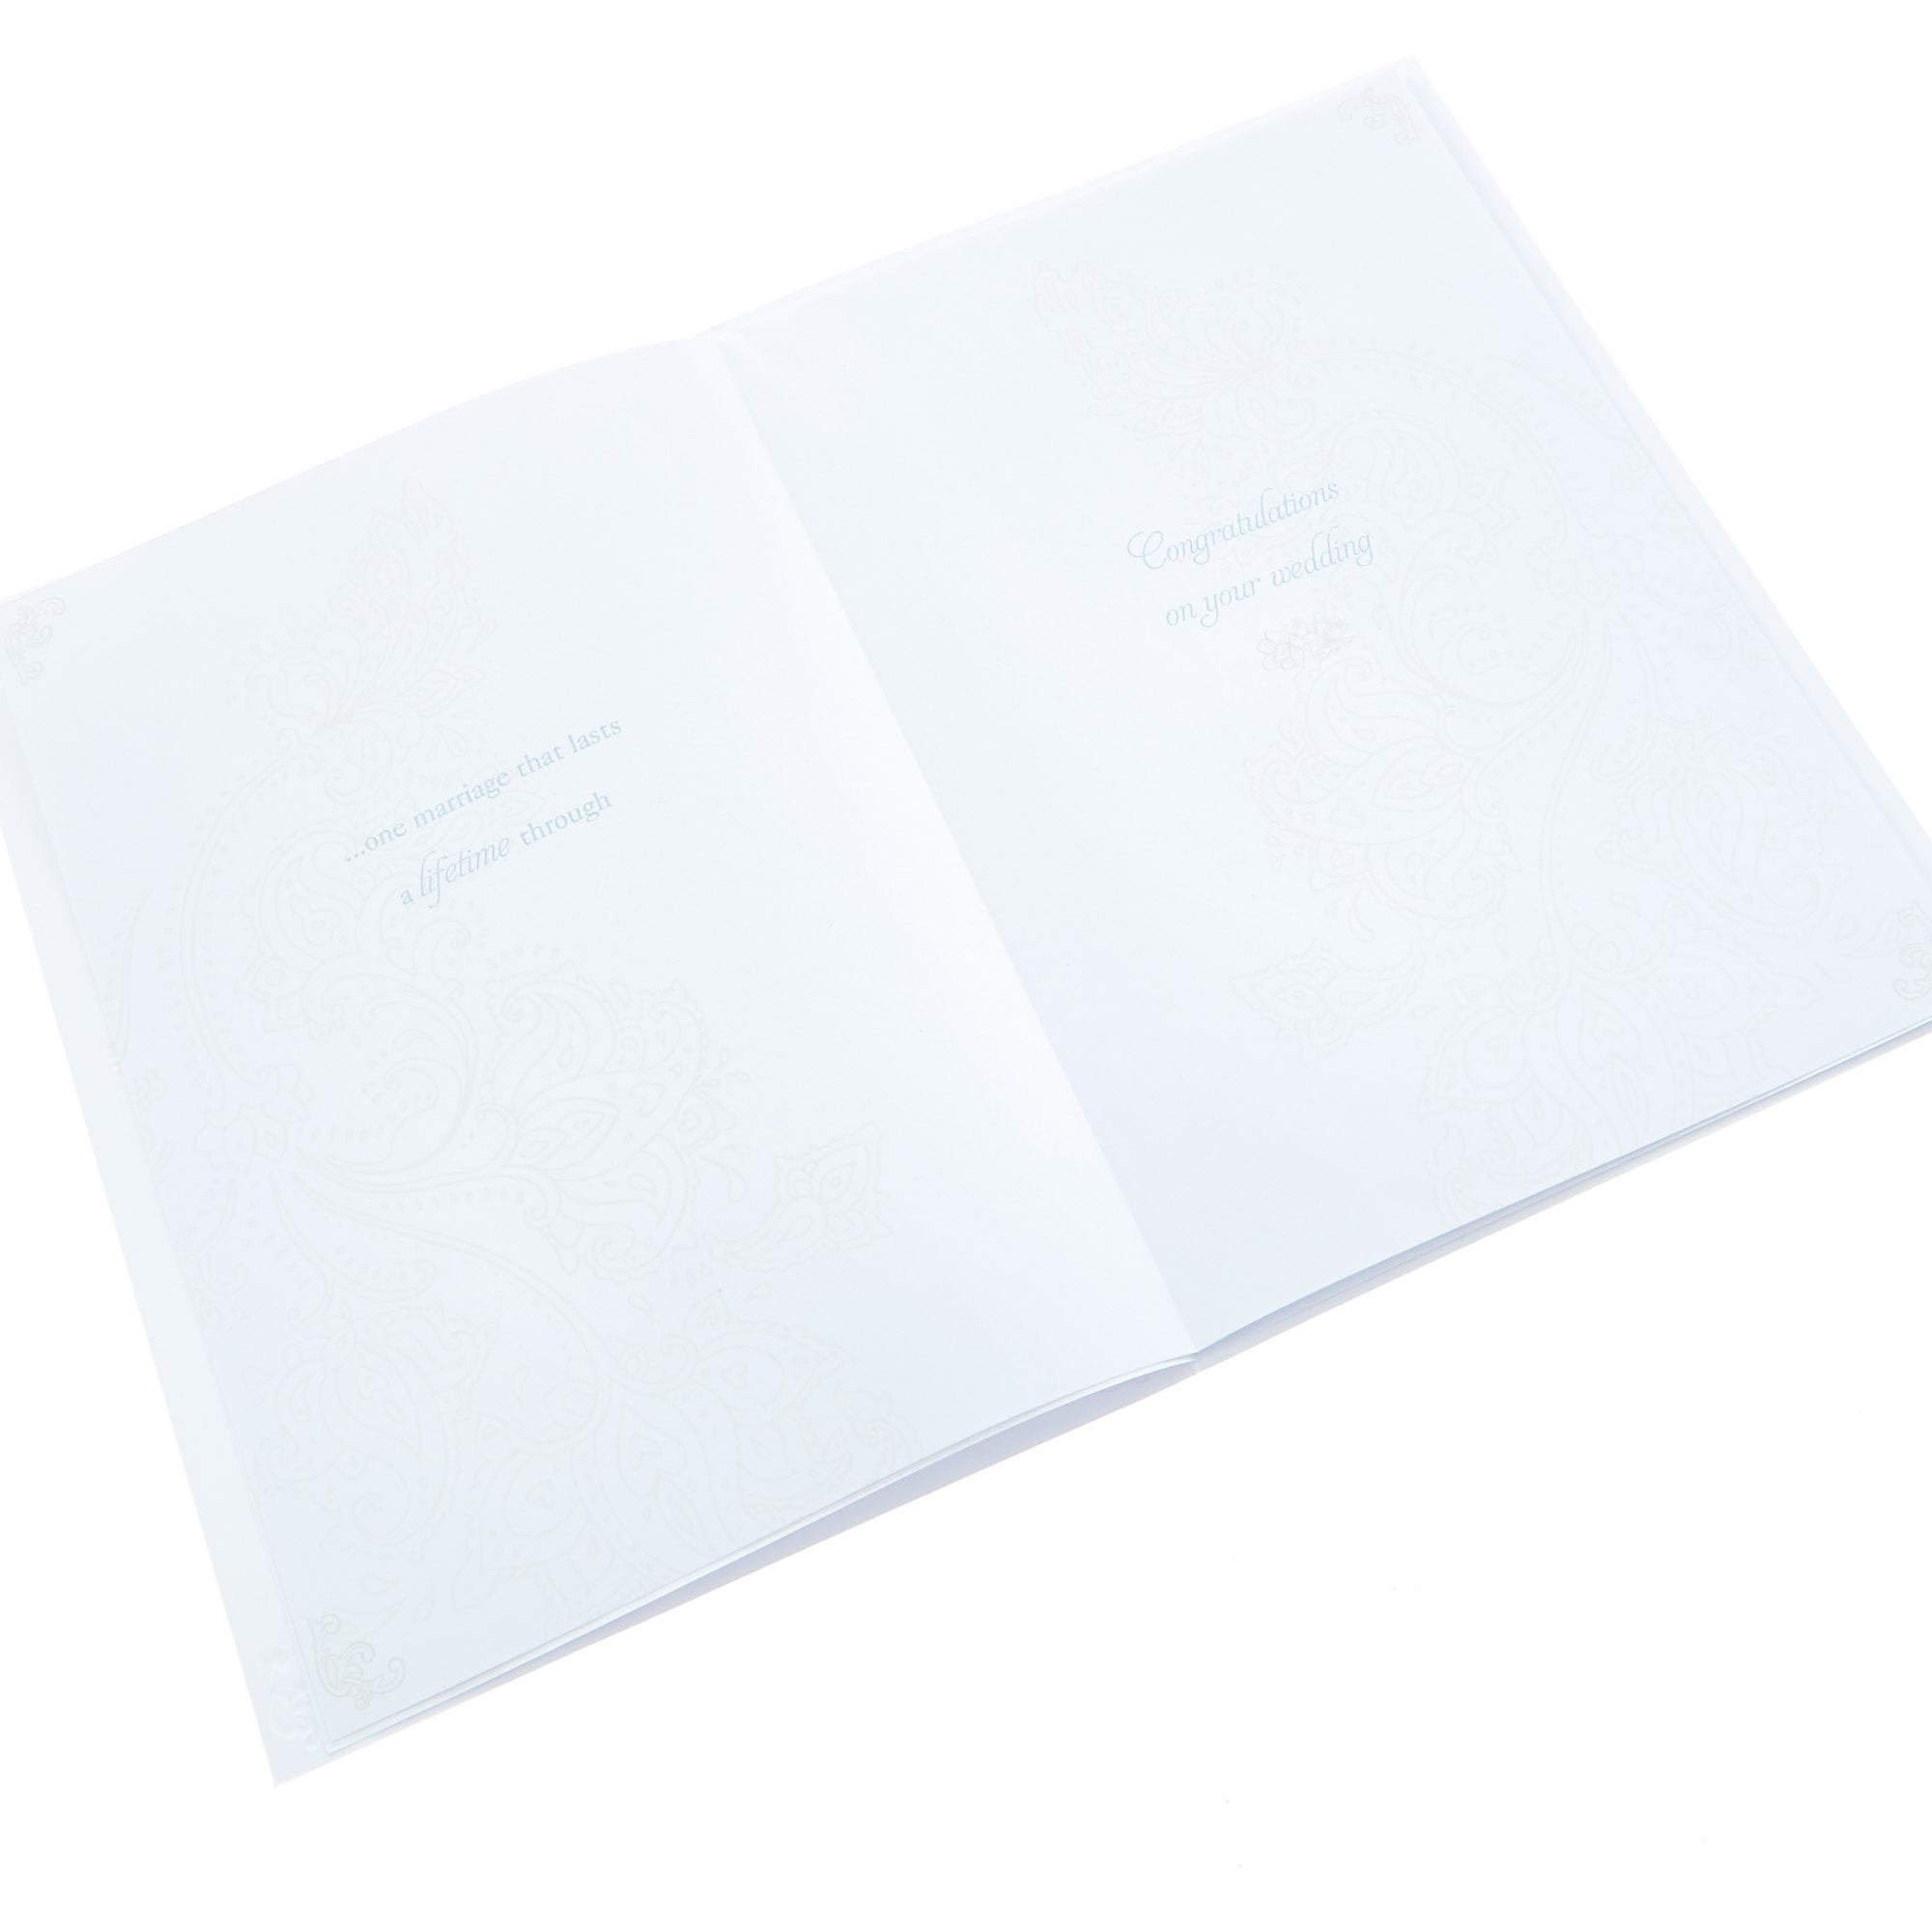 Wedding Card - Two People In Love